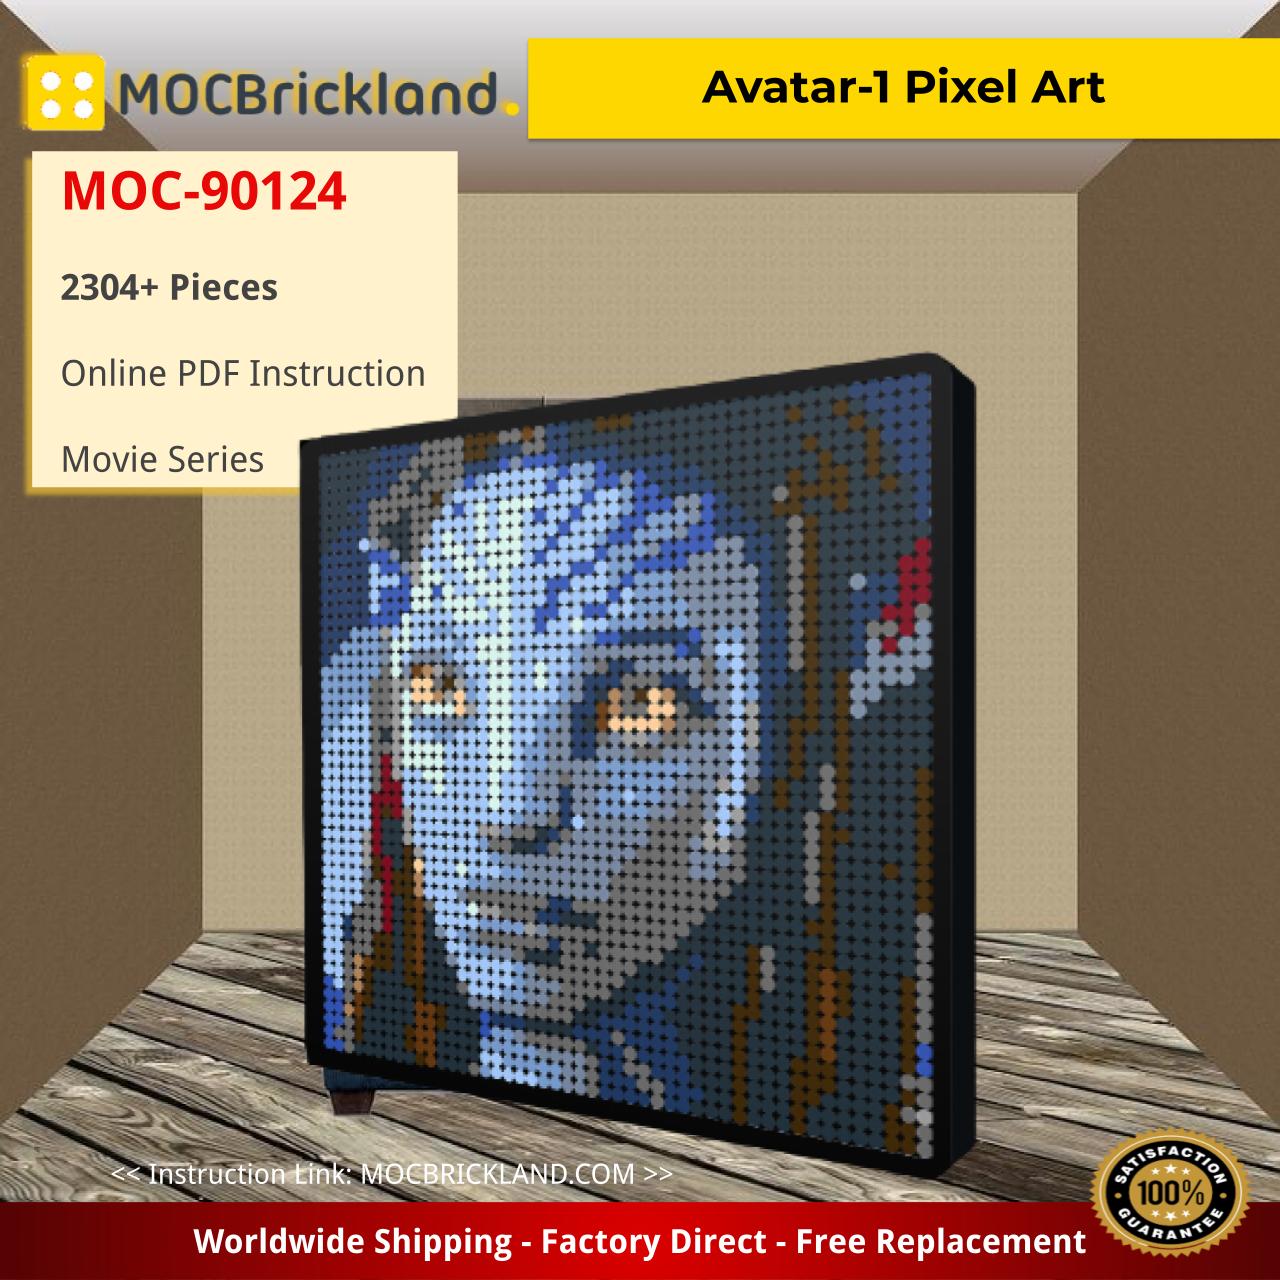 Avatar-1 Pixel Art Movie MOC-90124 with 2304 Pieces